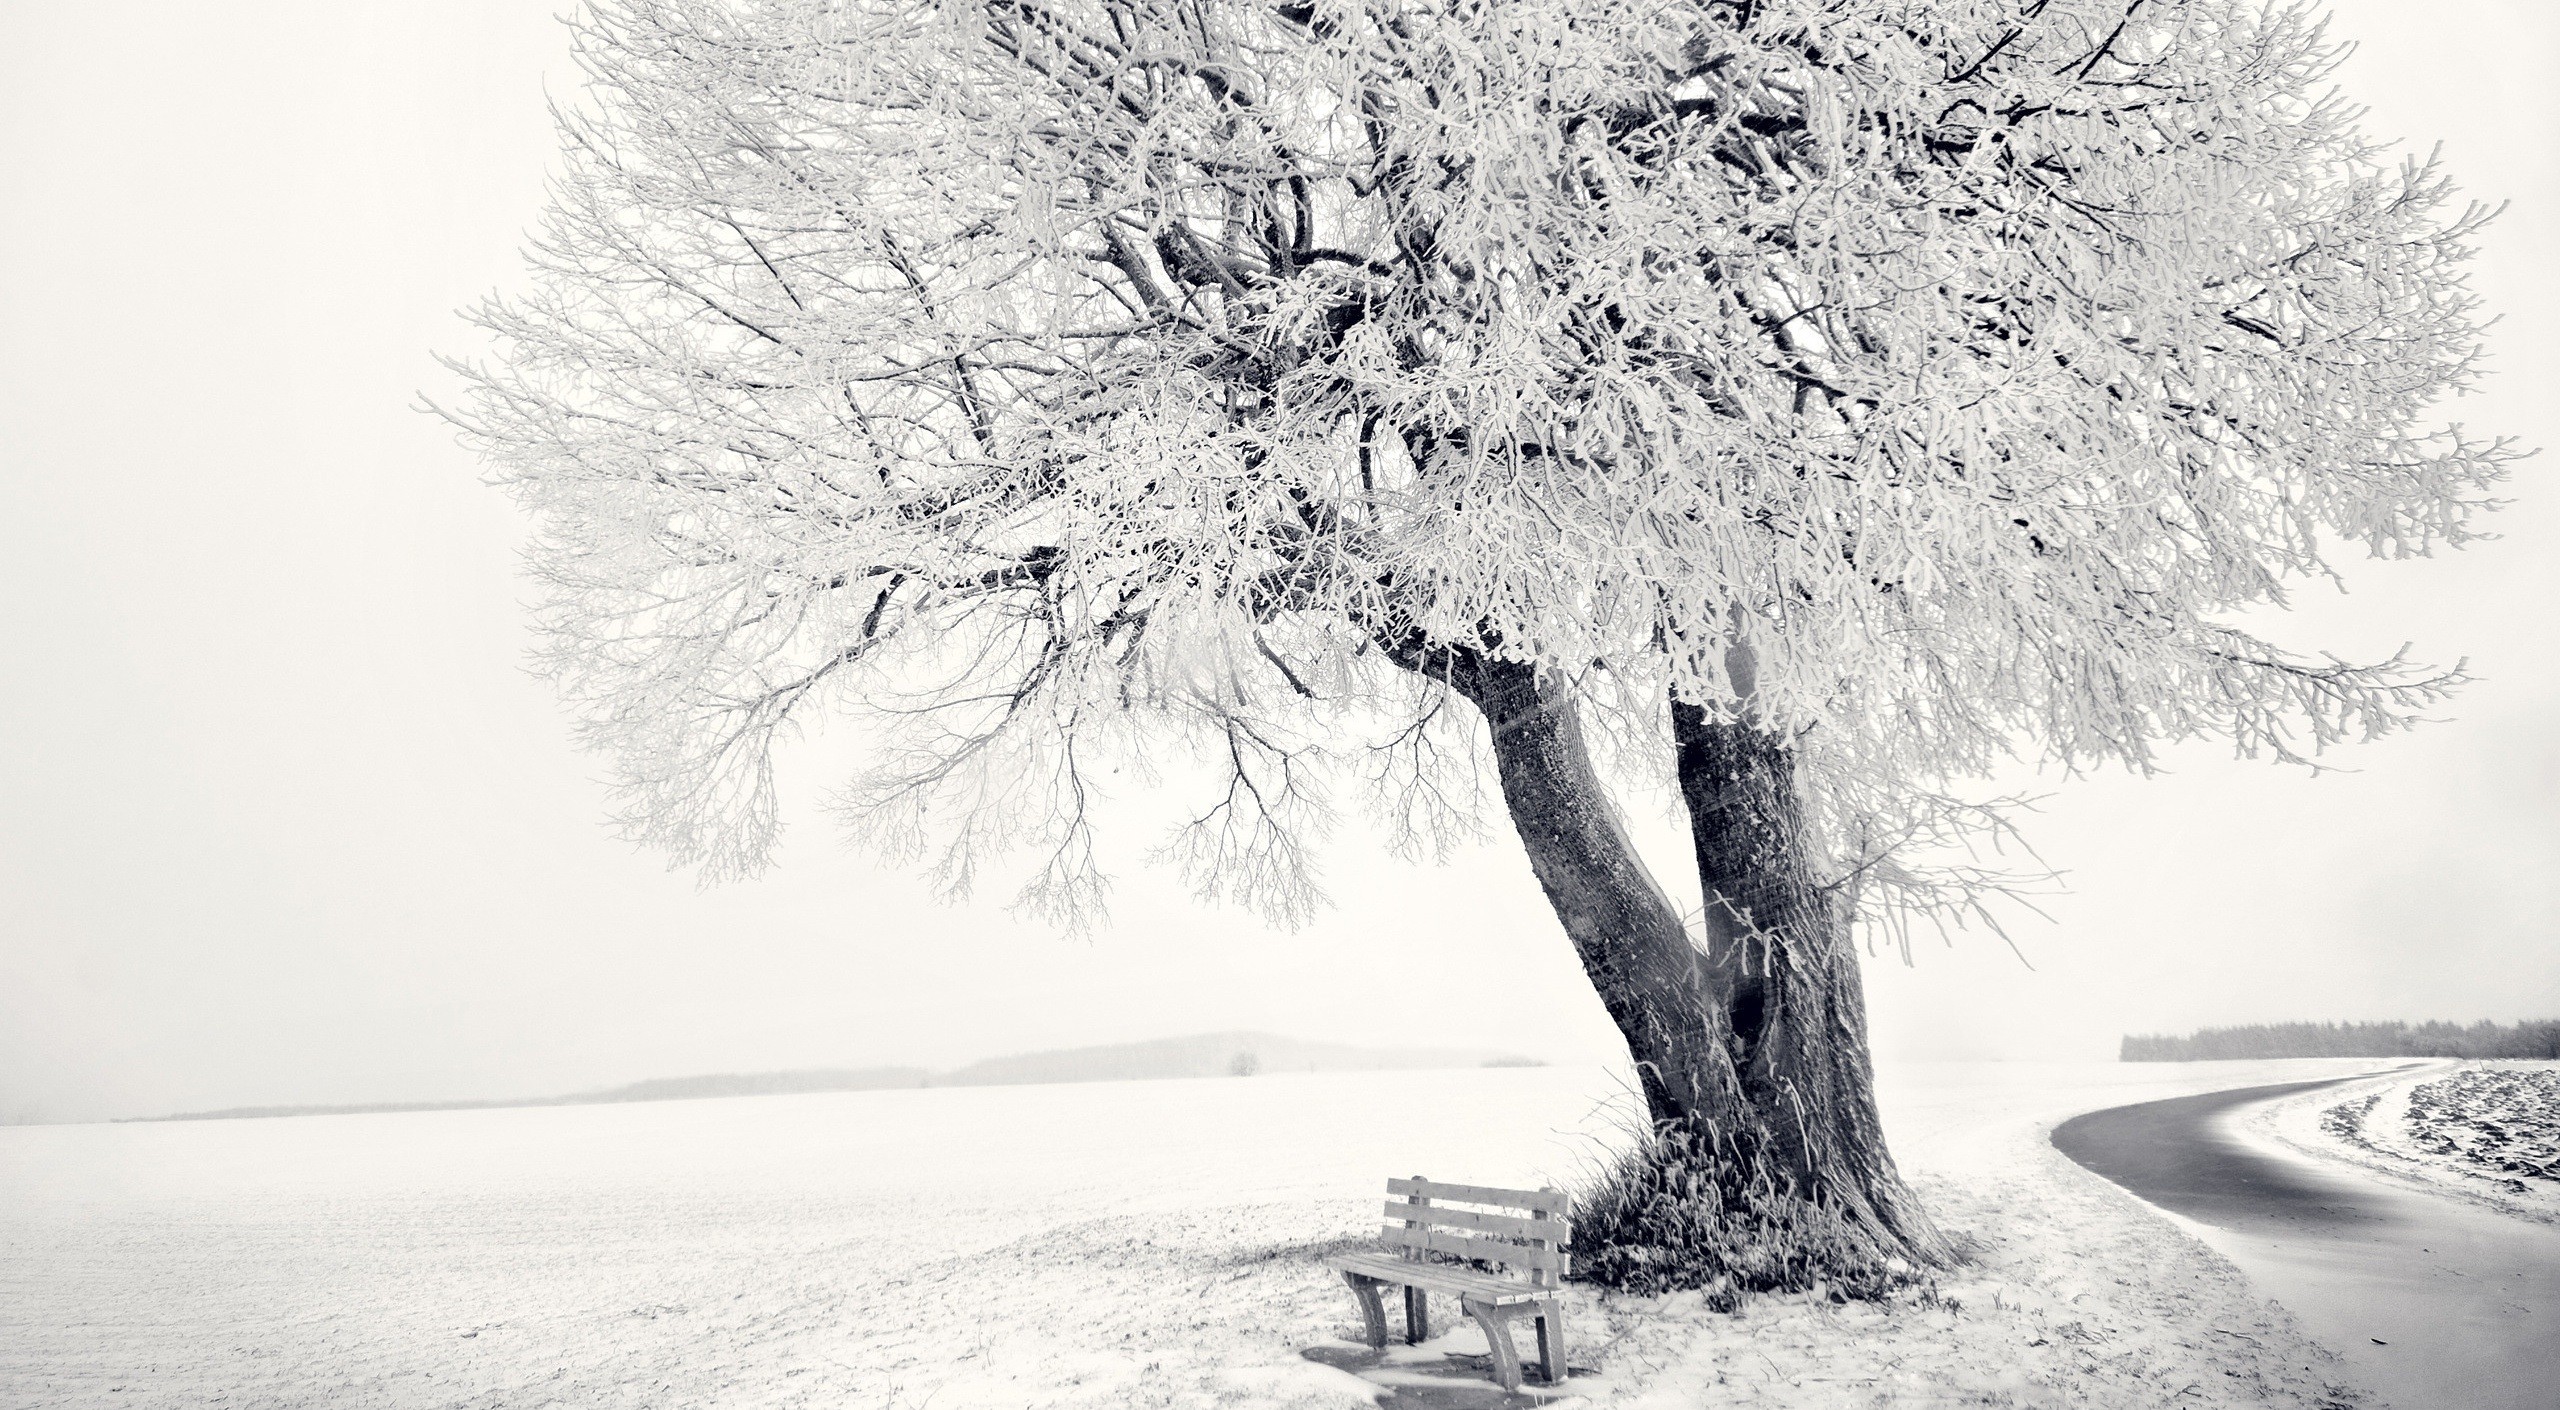 General 2560x1410 winter monochrome bench snow landscape outdoors cold ice trees